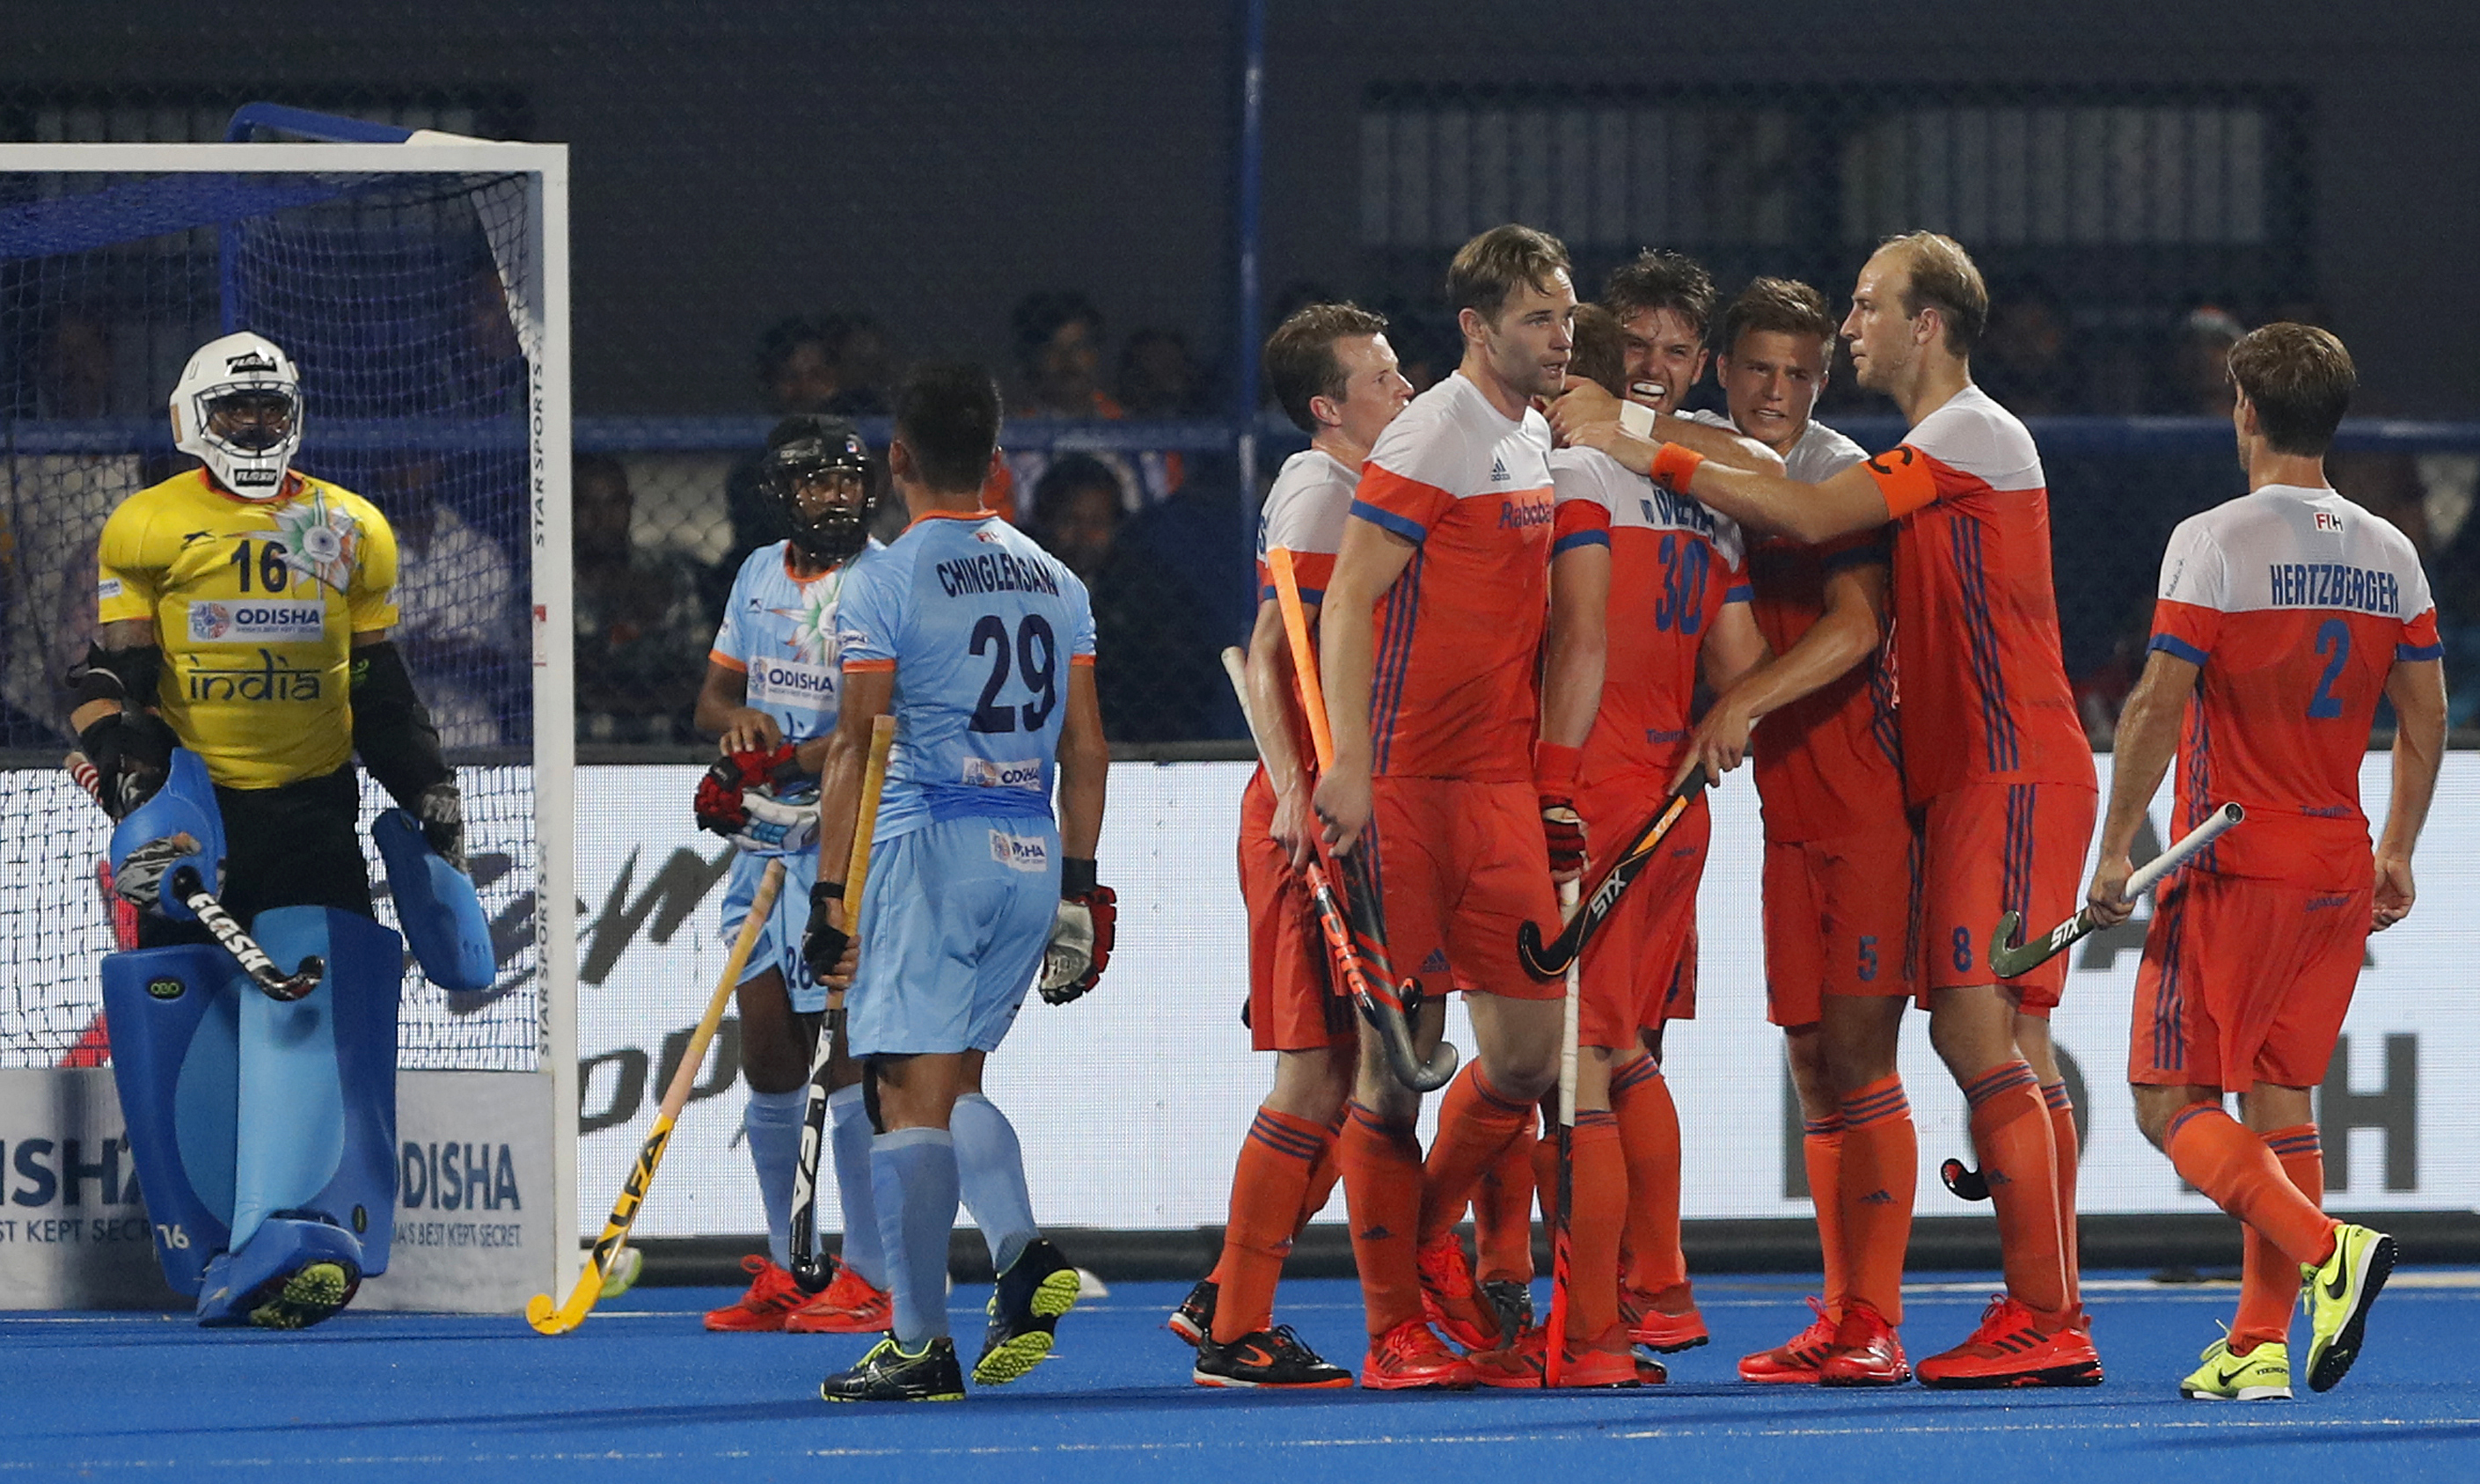 Netherlands players, in orange, celebrate after scoring a goal during the Men's Hockey World Cup quarterfinal match between India and Netherlands at Kalinga Stadium in Bhubaneswar - AP